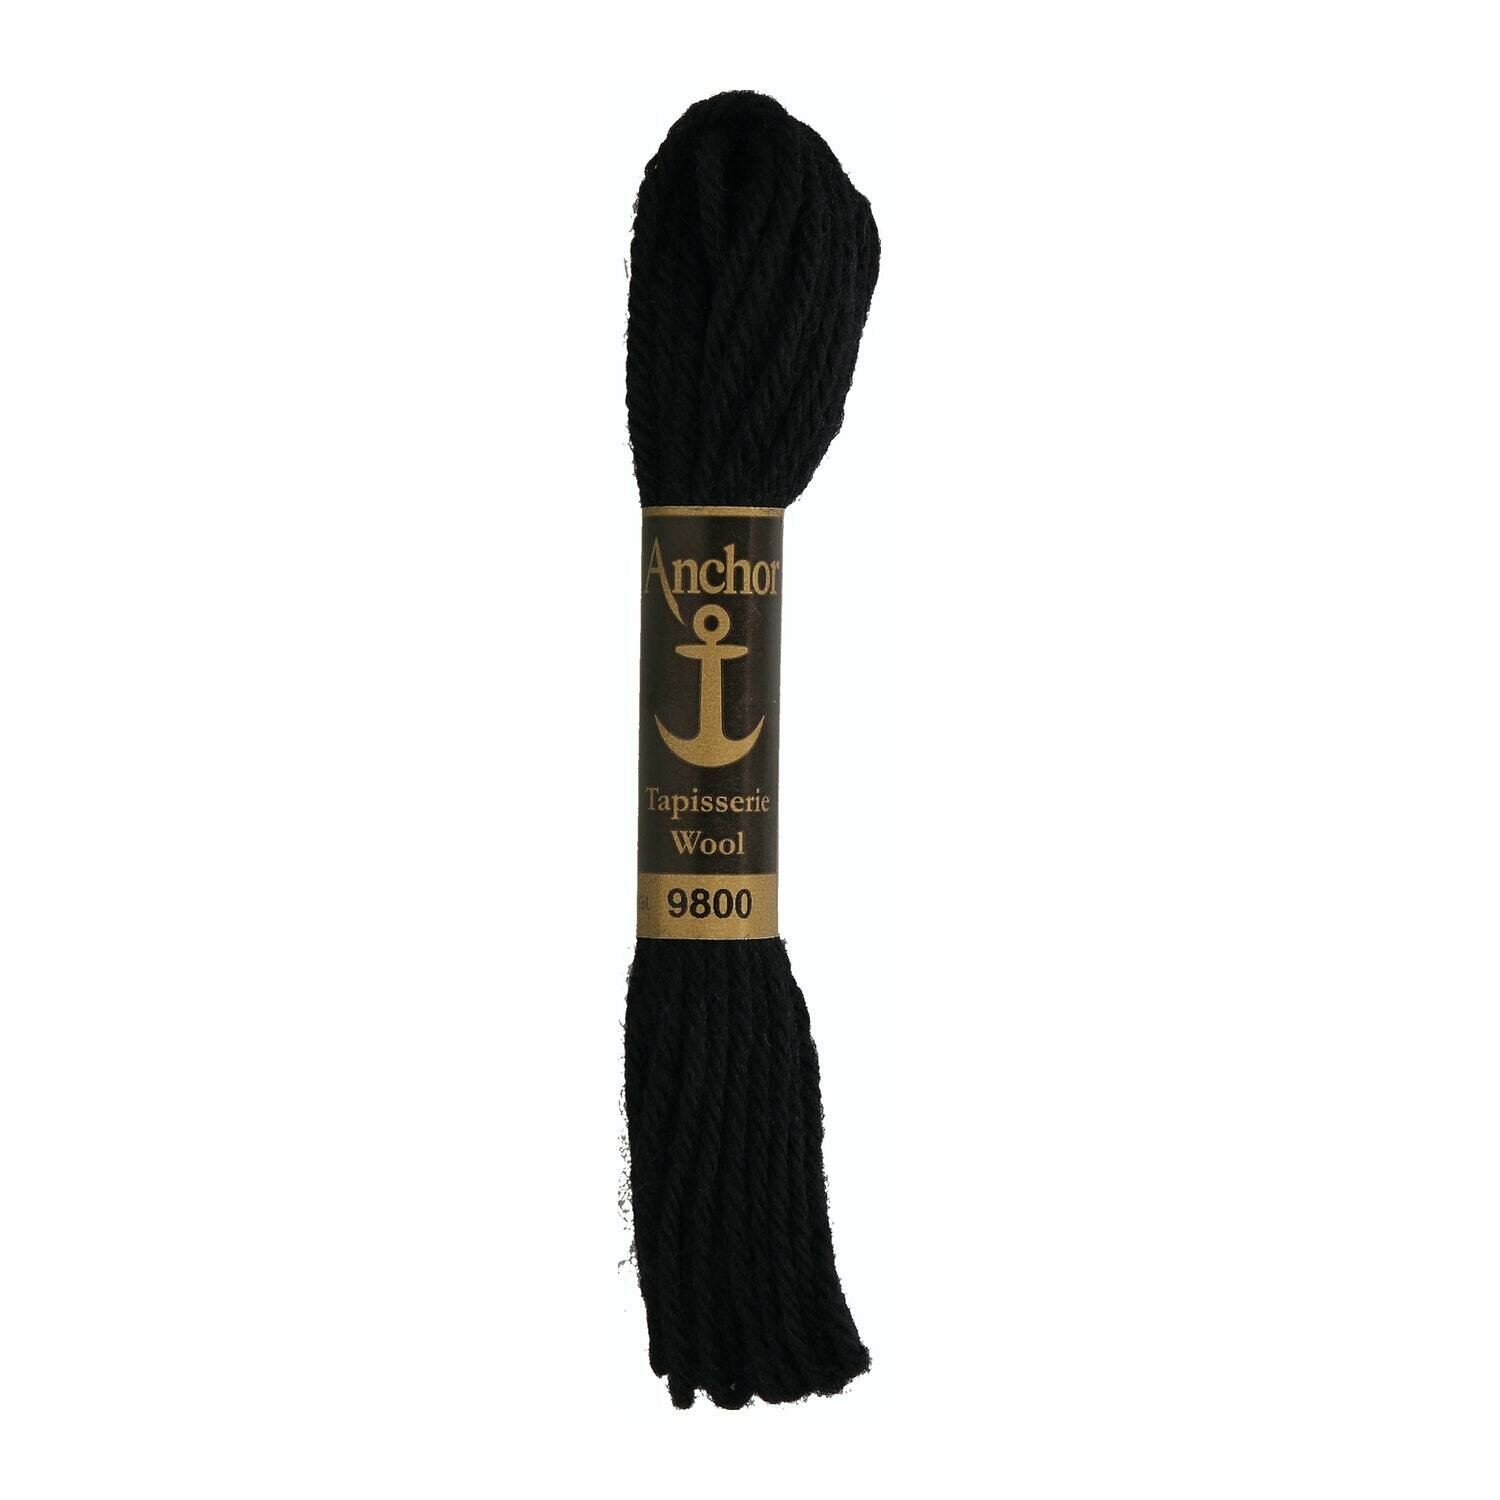 Anchor Tapisserie Wool #  09800